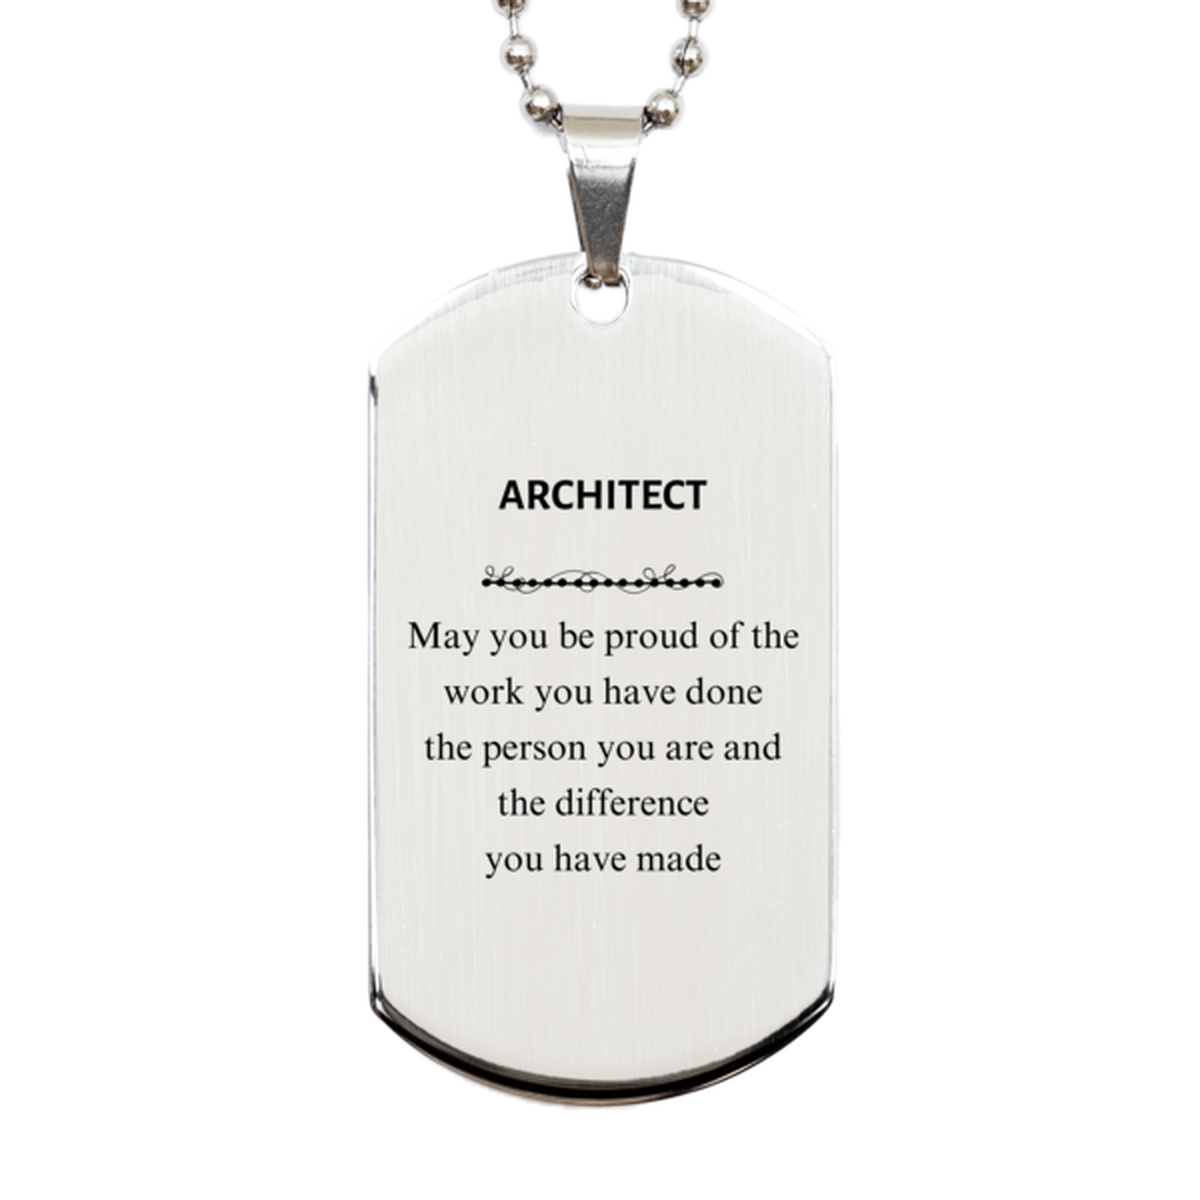 Architect May you be proud of the work you have done, Retirement Architect Silver Dog Tag for Colleague Appreciation Gifts Amazing for Architect